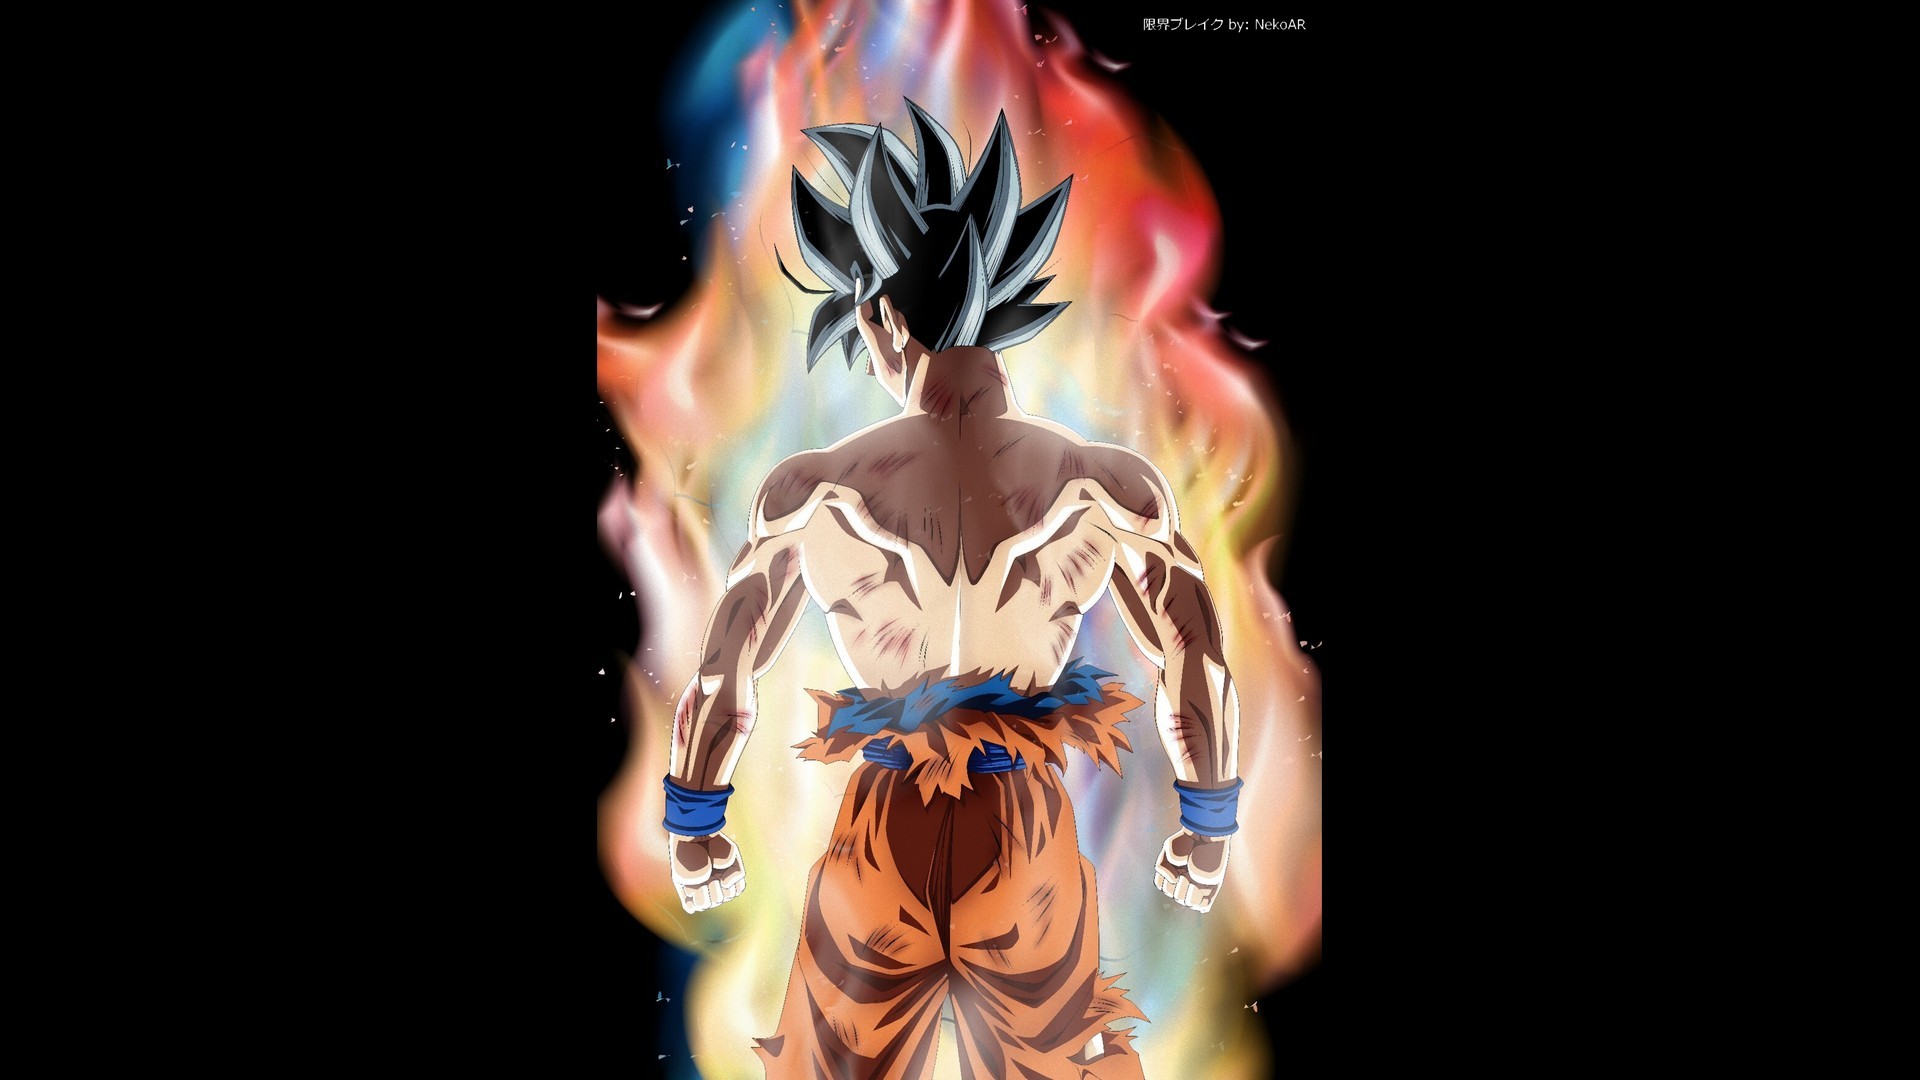 Wallpapers Goku Images with image resolution 1920x1080 pixel. You can use this wallpaper as background for your desktop Computer Screensavers, Android or iPhone smartphones